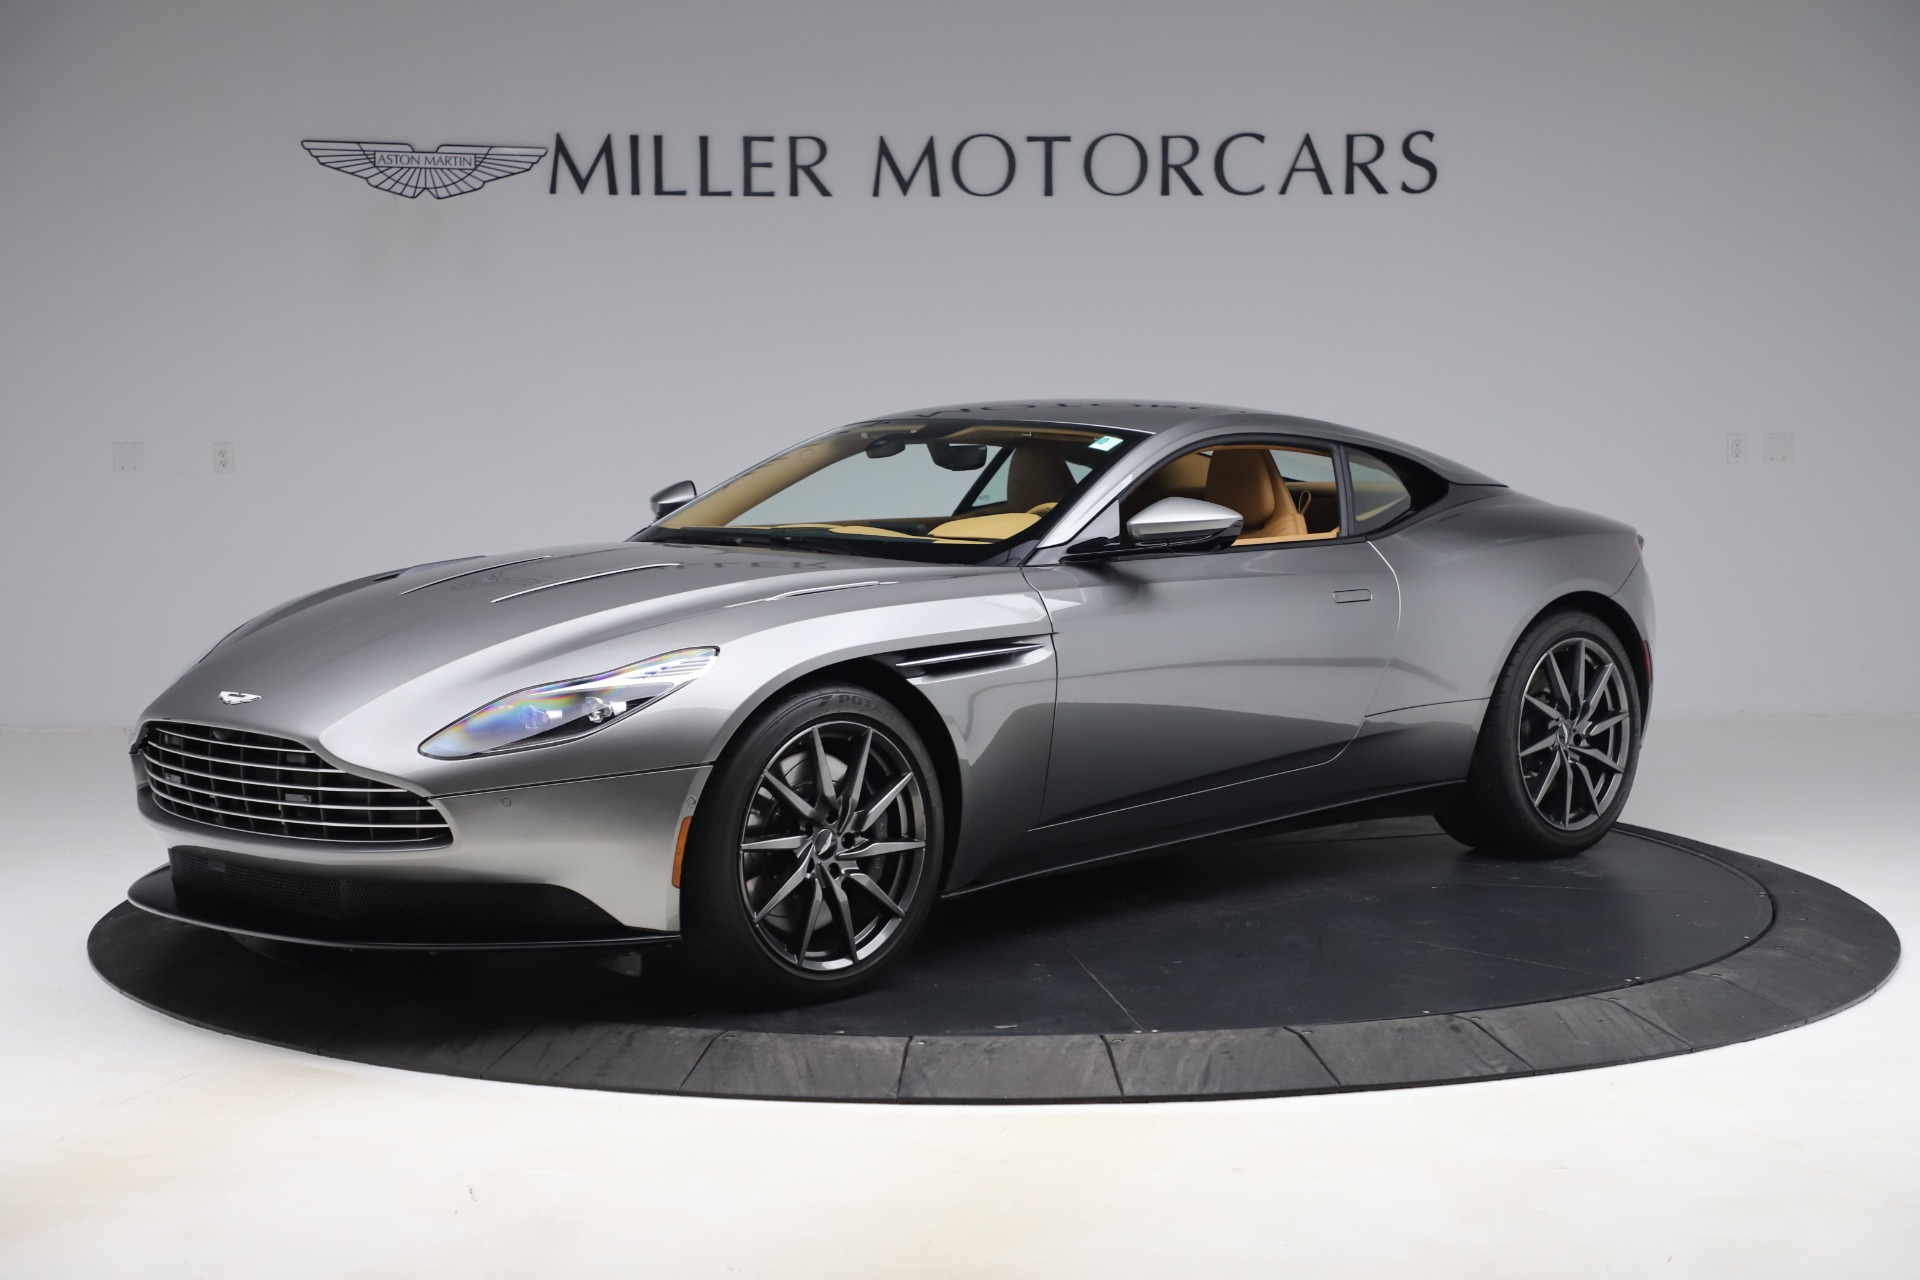 Used 2017 Aston Martin DB11 V12 Coupe for sale Sold at Rolls-Royce Motor Cars Greenwich in Greenwich CT 06830 1